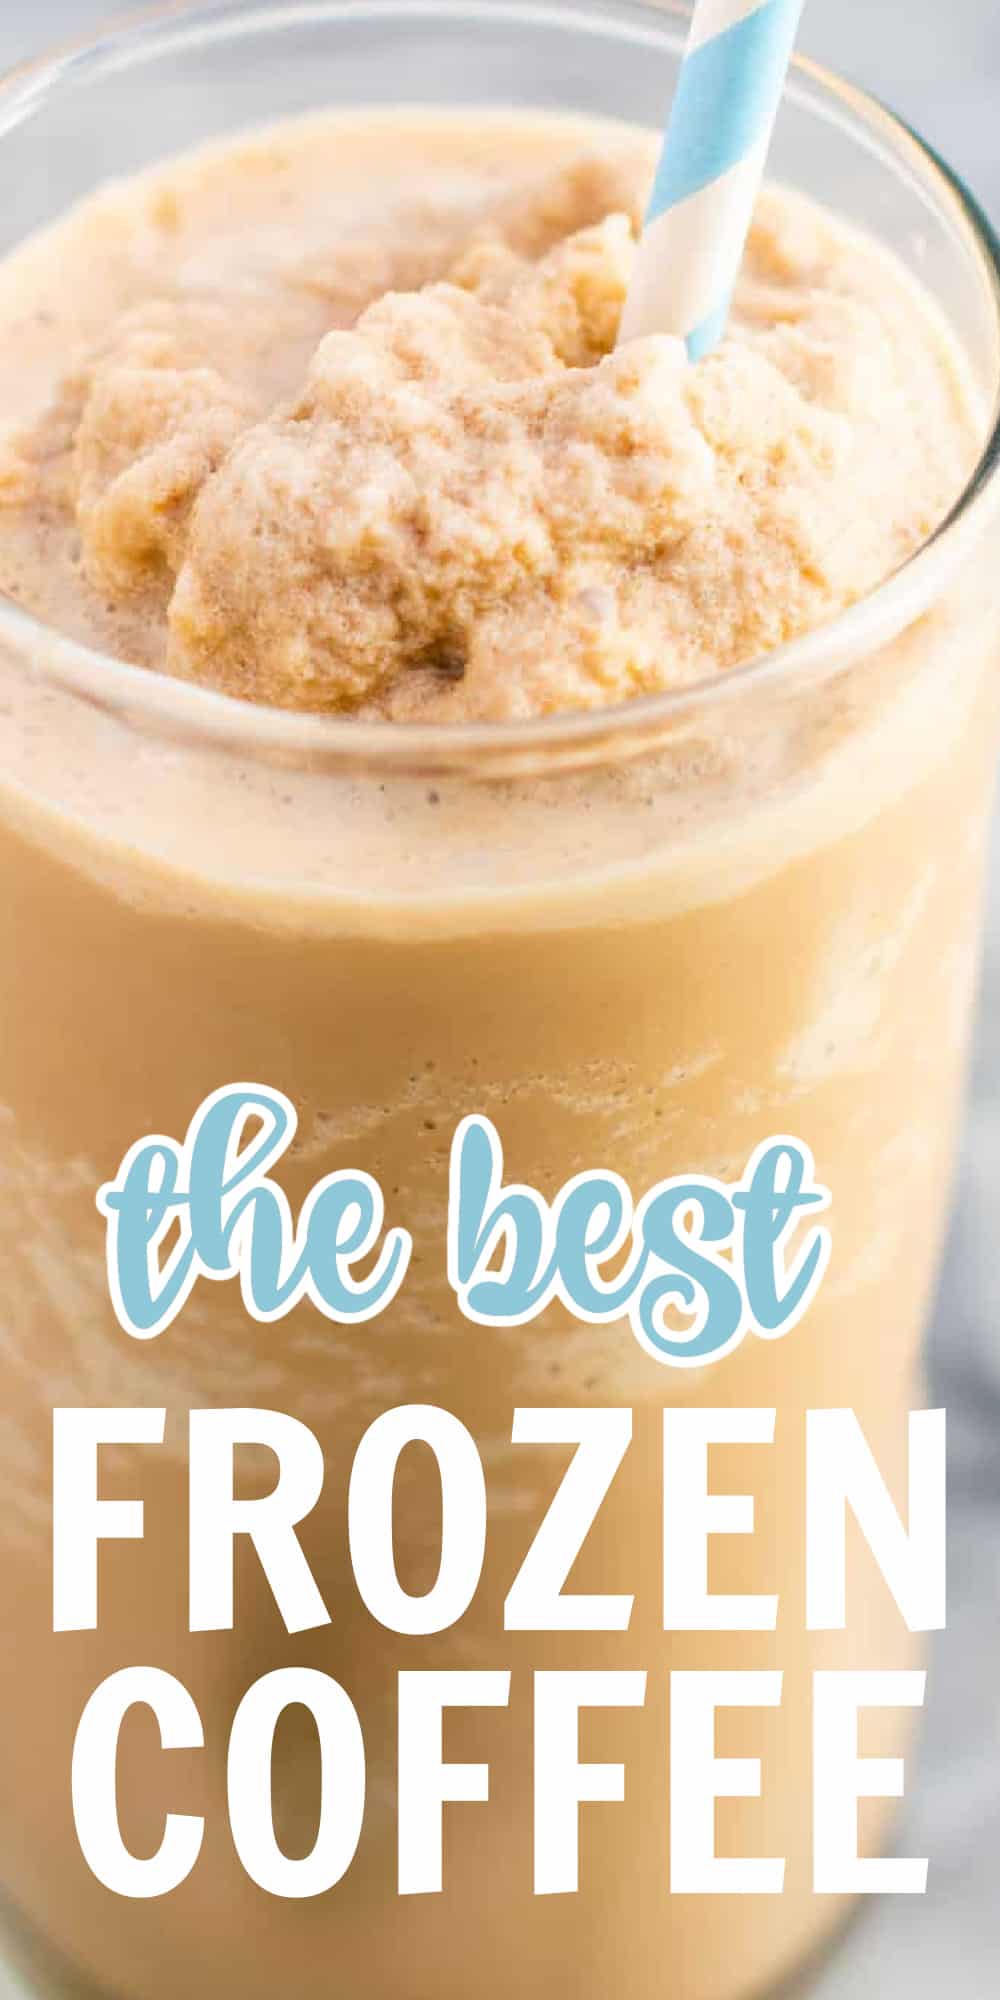 image with text "the best frozen coffee"